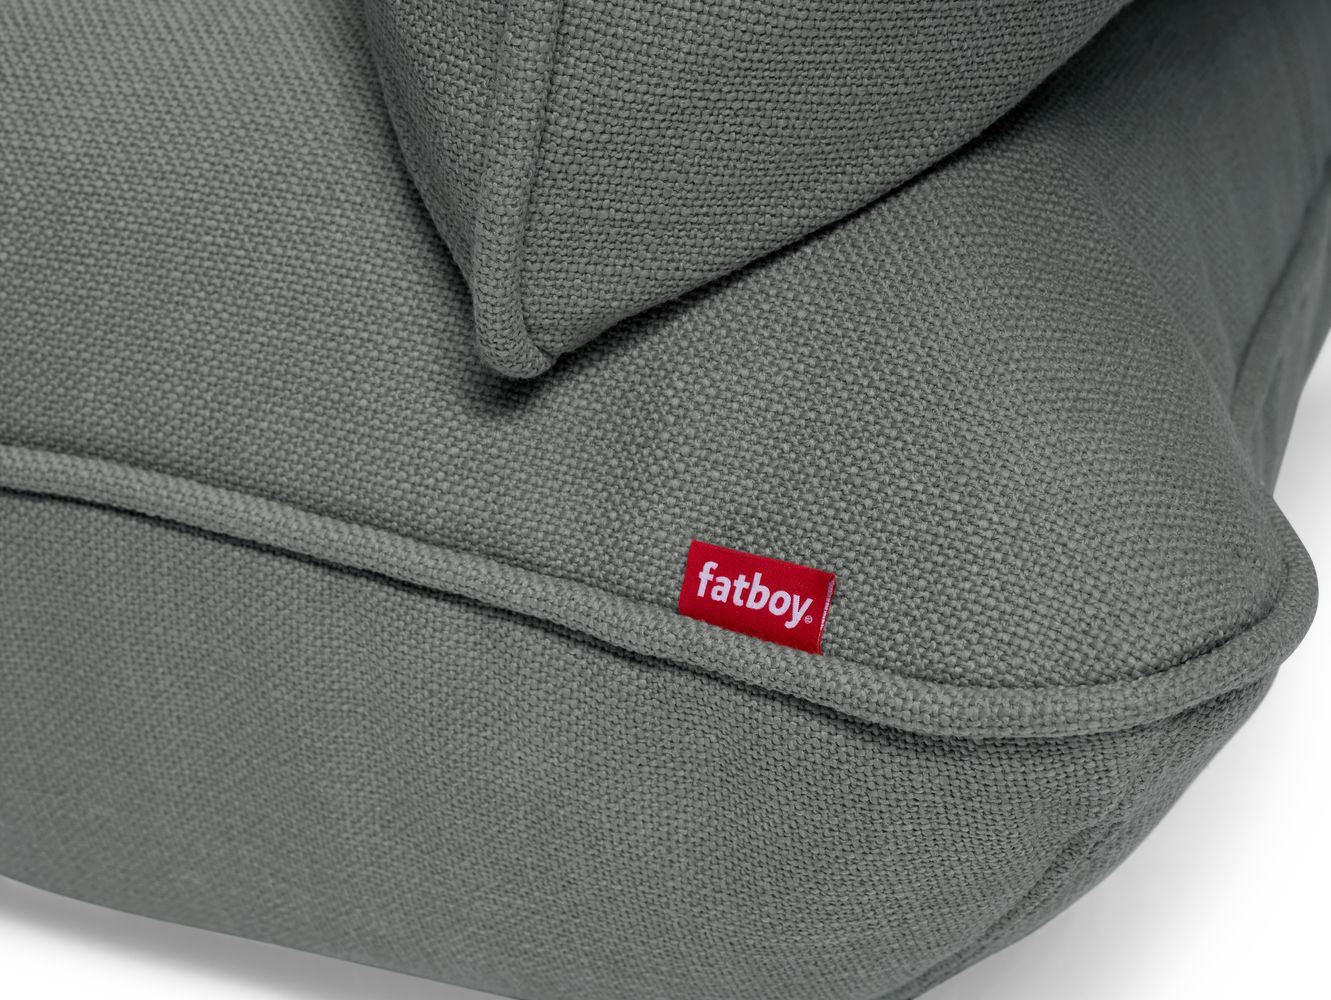 Fatboy Sumo Seat Item, Mouse Grey